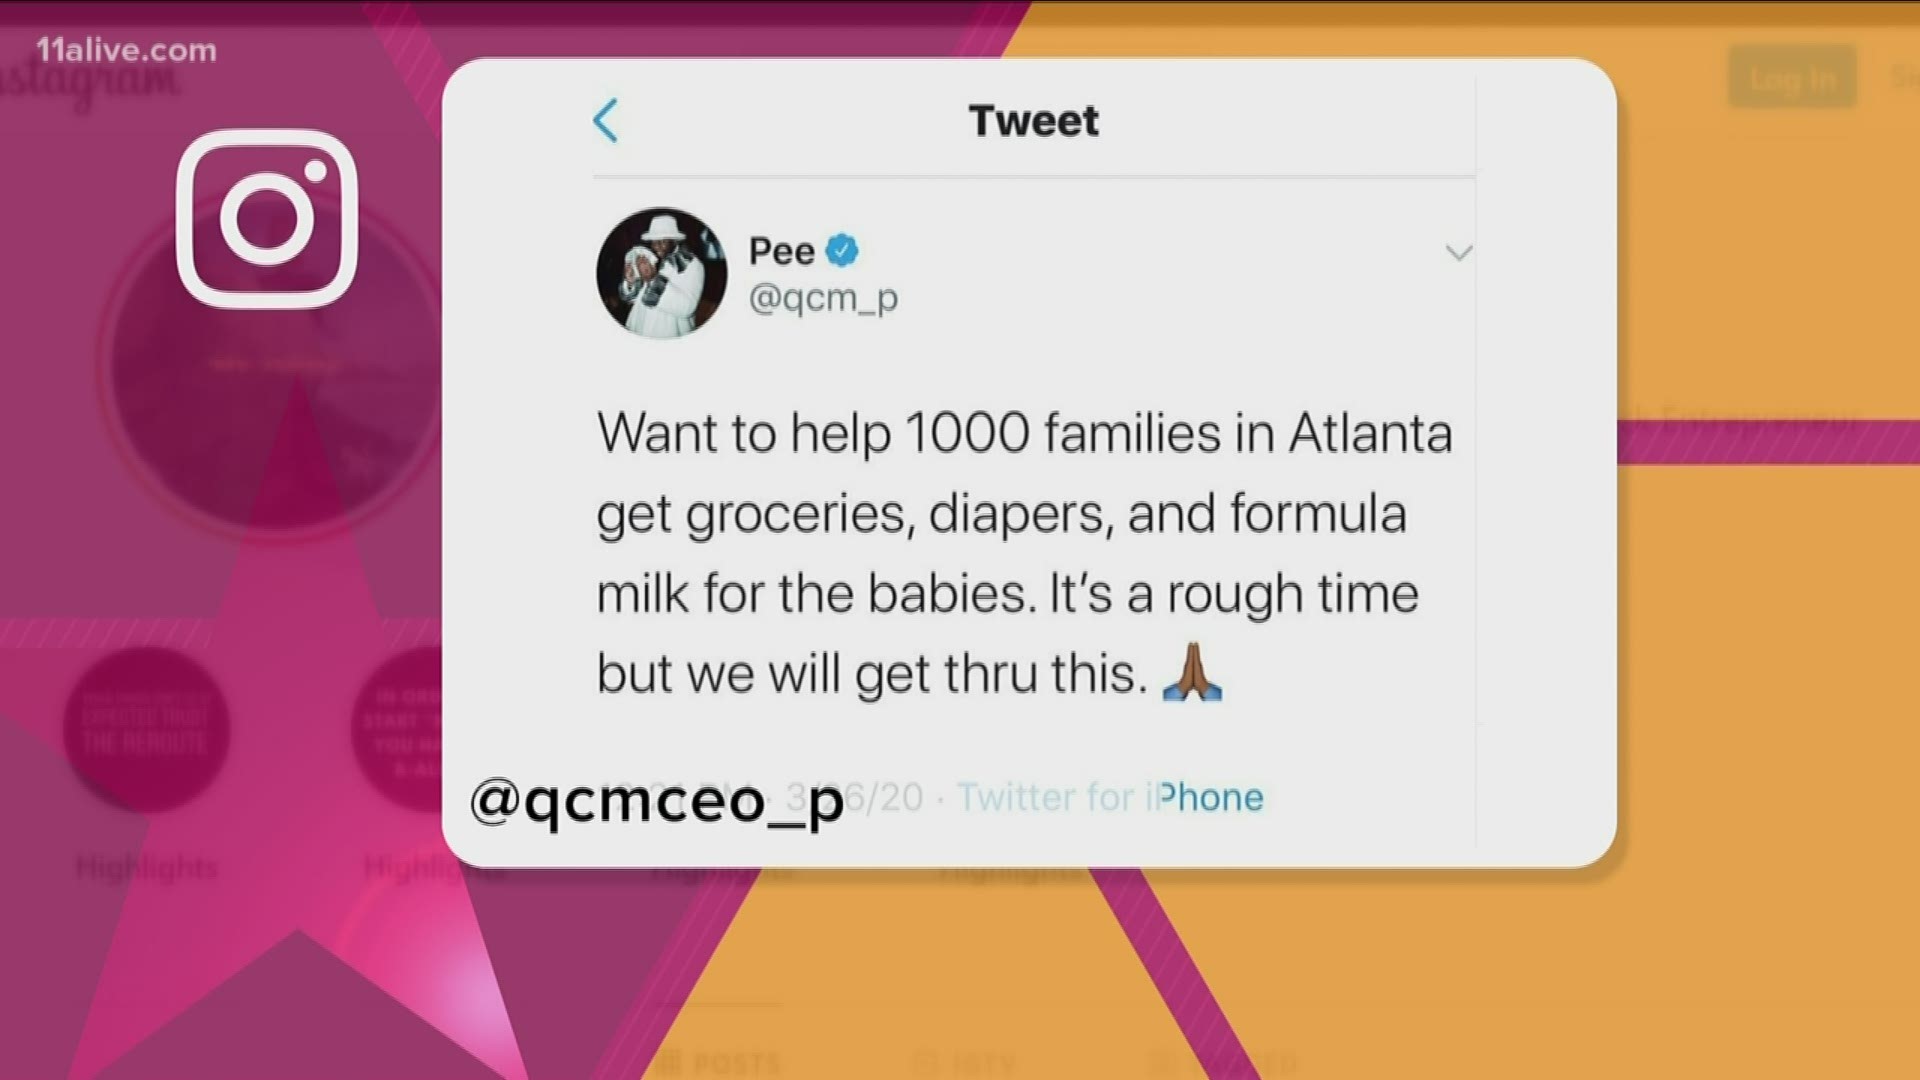 Pee from Quality Control wants to help 1,000 families in Atlanta through Goodr.